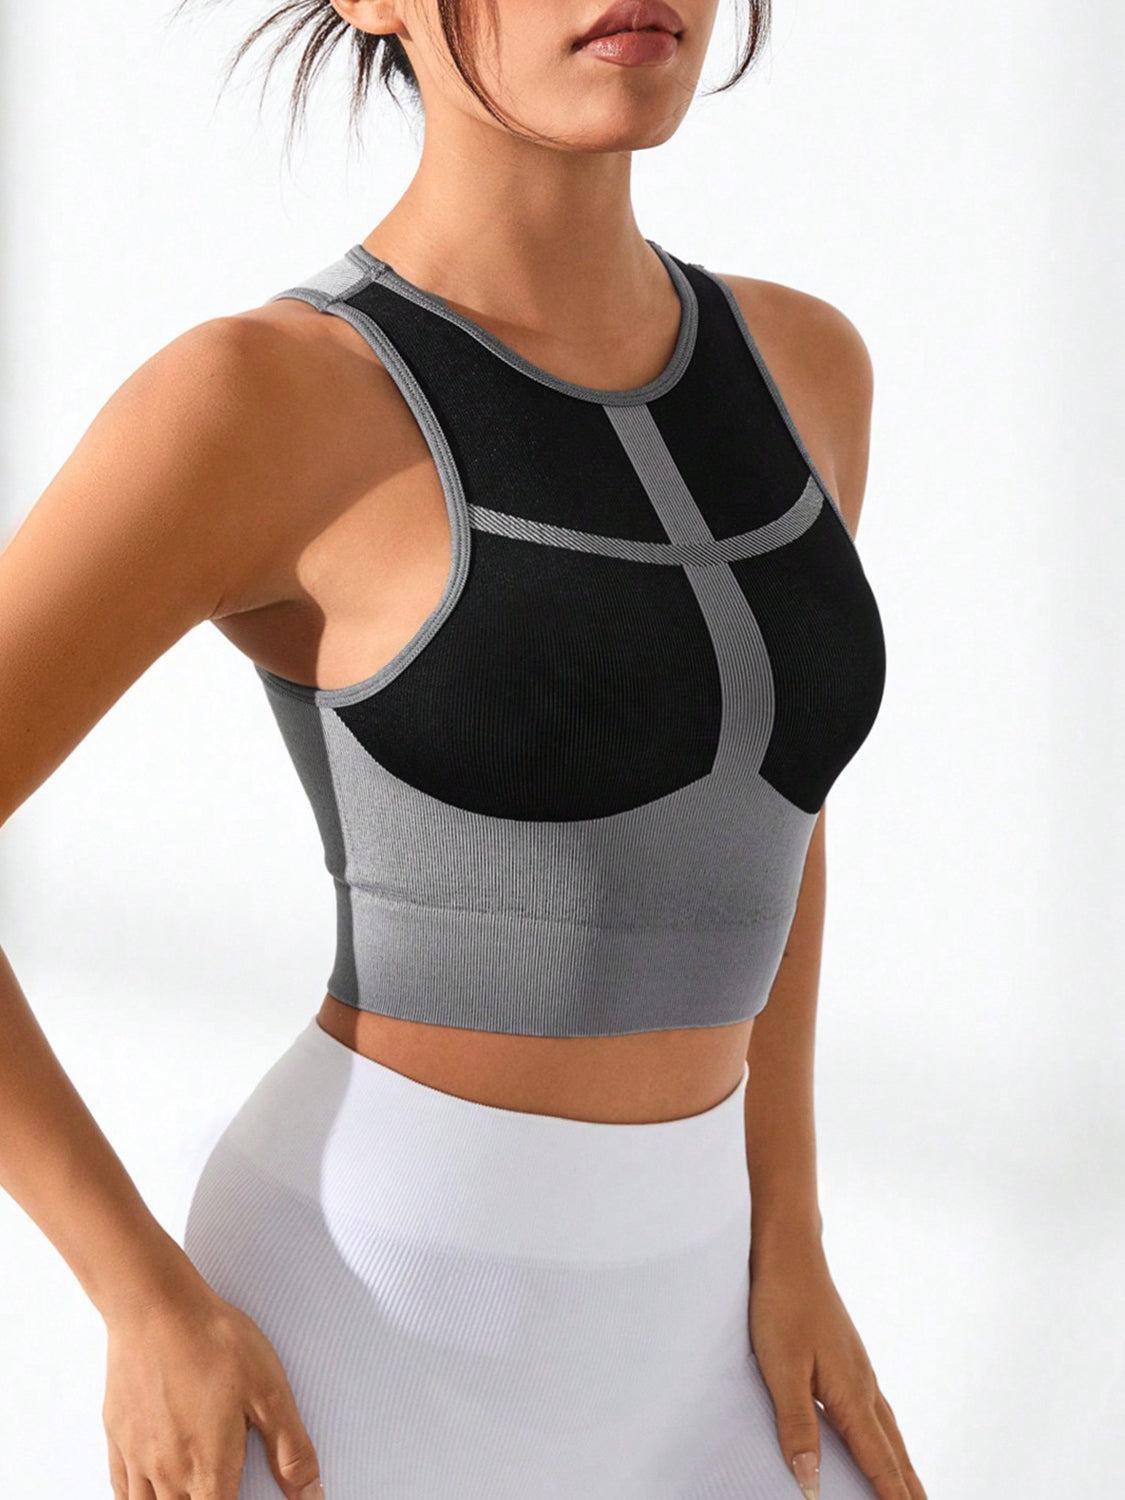 a woman in a gray and black sports bra